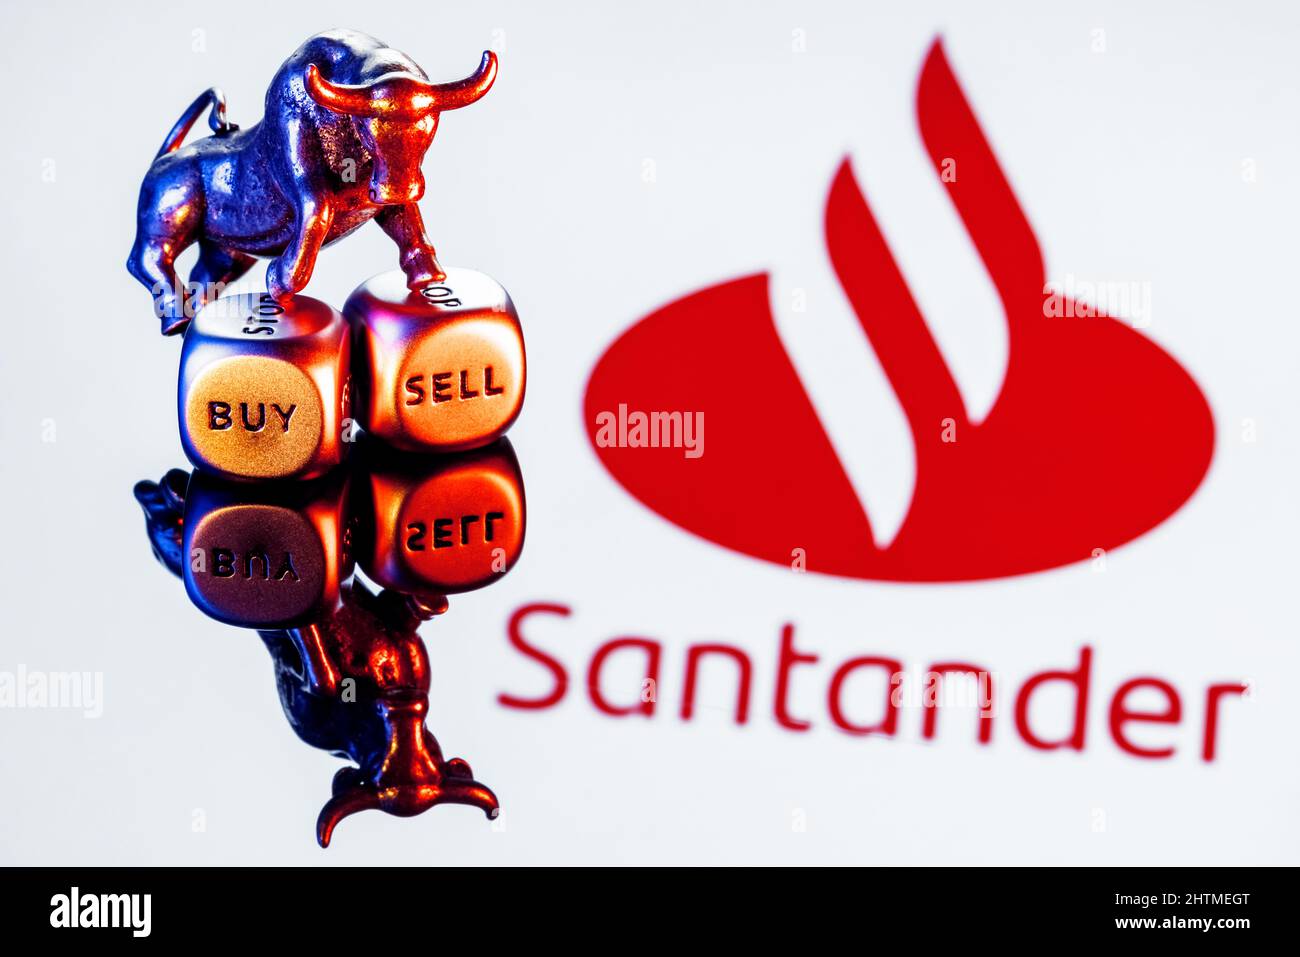 Metal bull stands on buy-sell dices on background of Santander bank logo Stock Photo